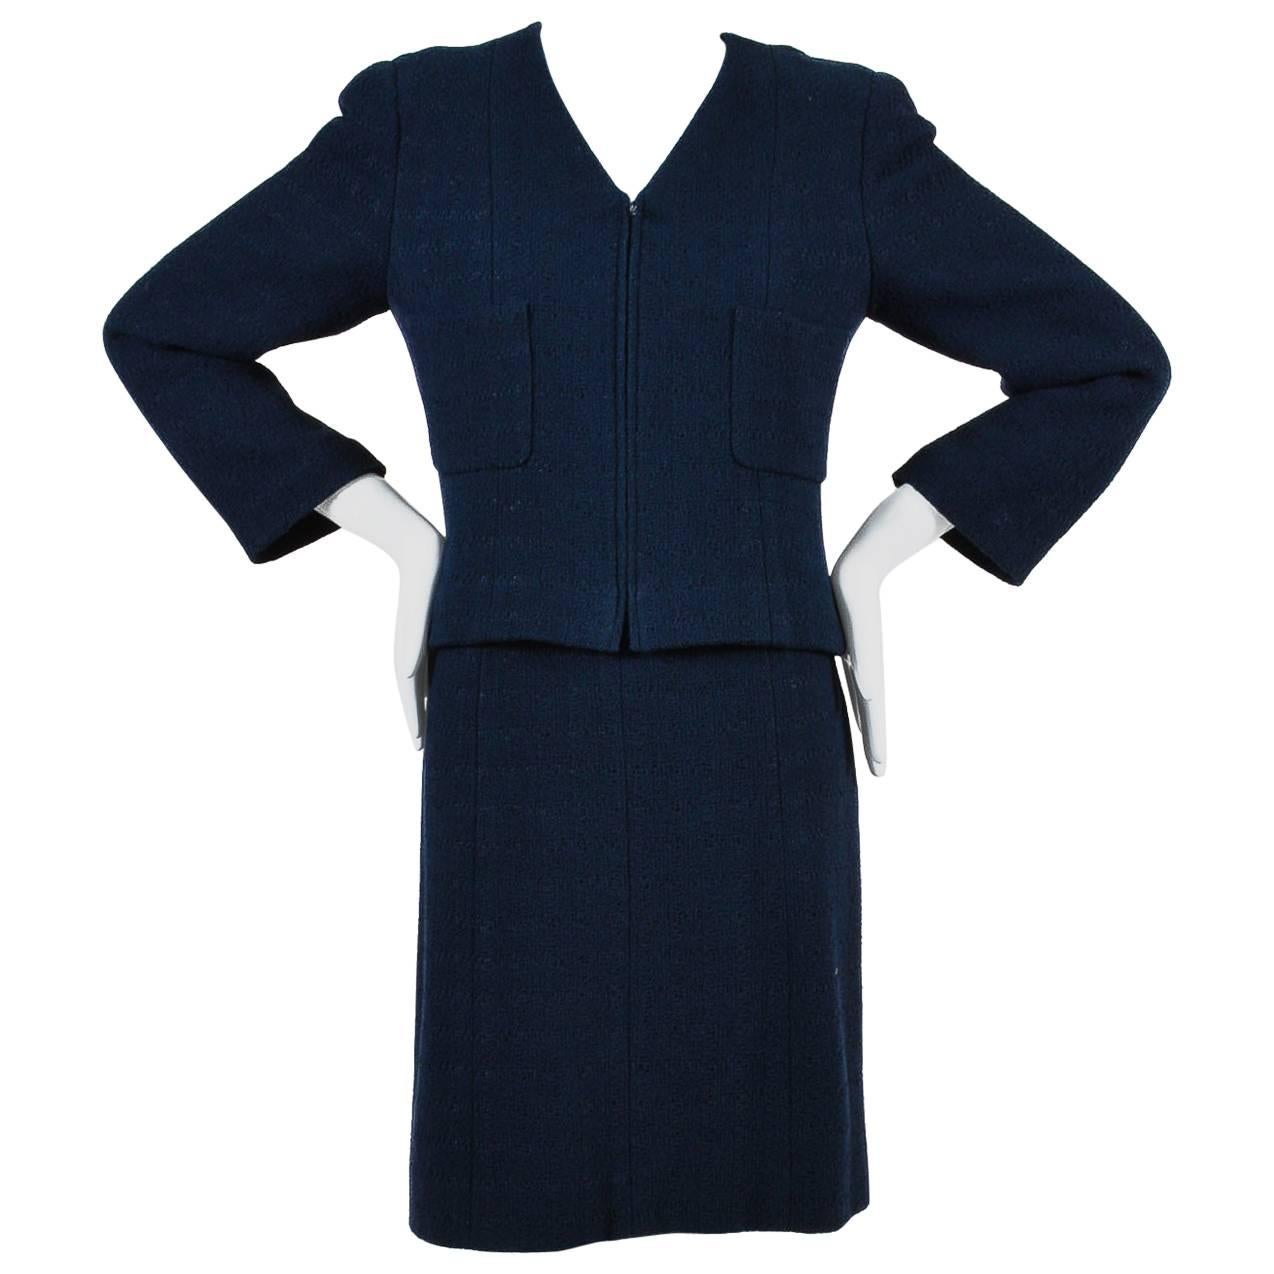 Chanel Navy Blue Boucle Tweed Zip Long Sleeve Jacket A Line Skirt Suit Set SZ 40 For Sale